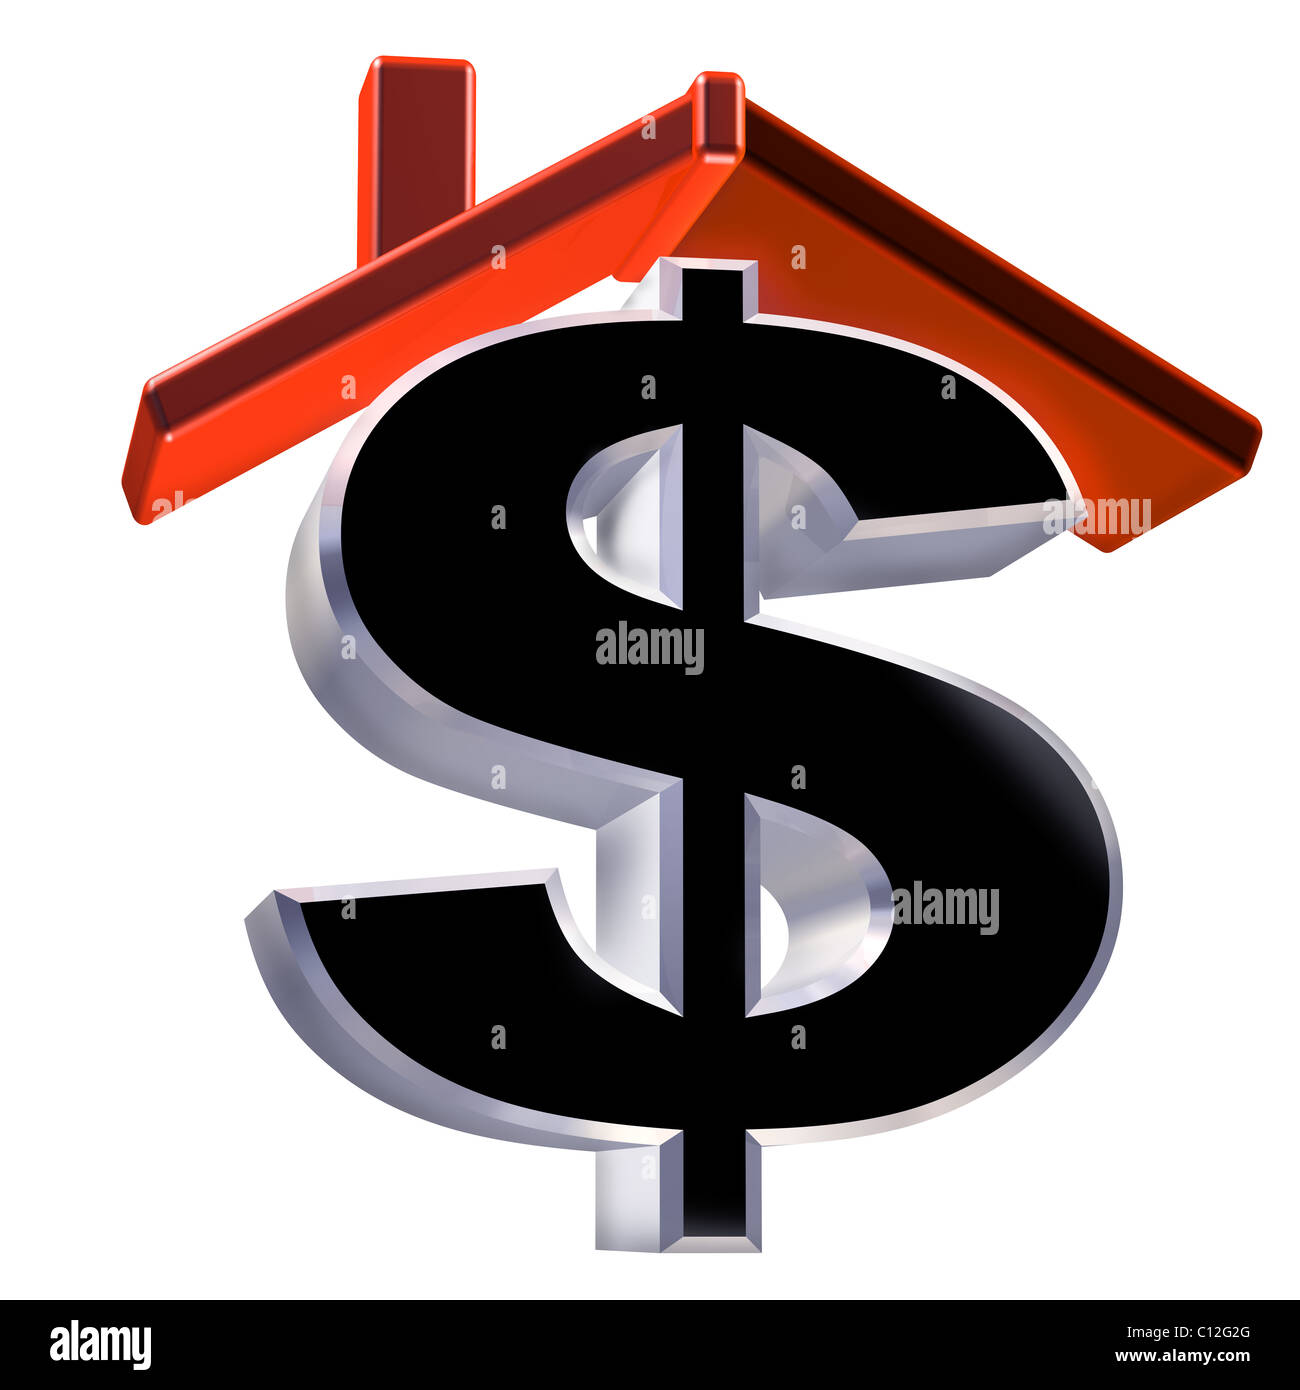 Isolated illustration showing the cost of a house Stock Photo